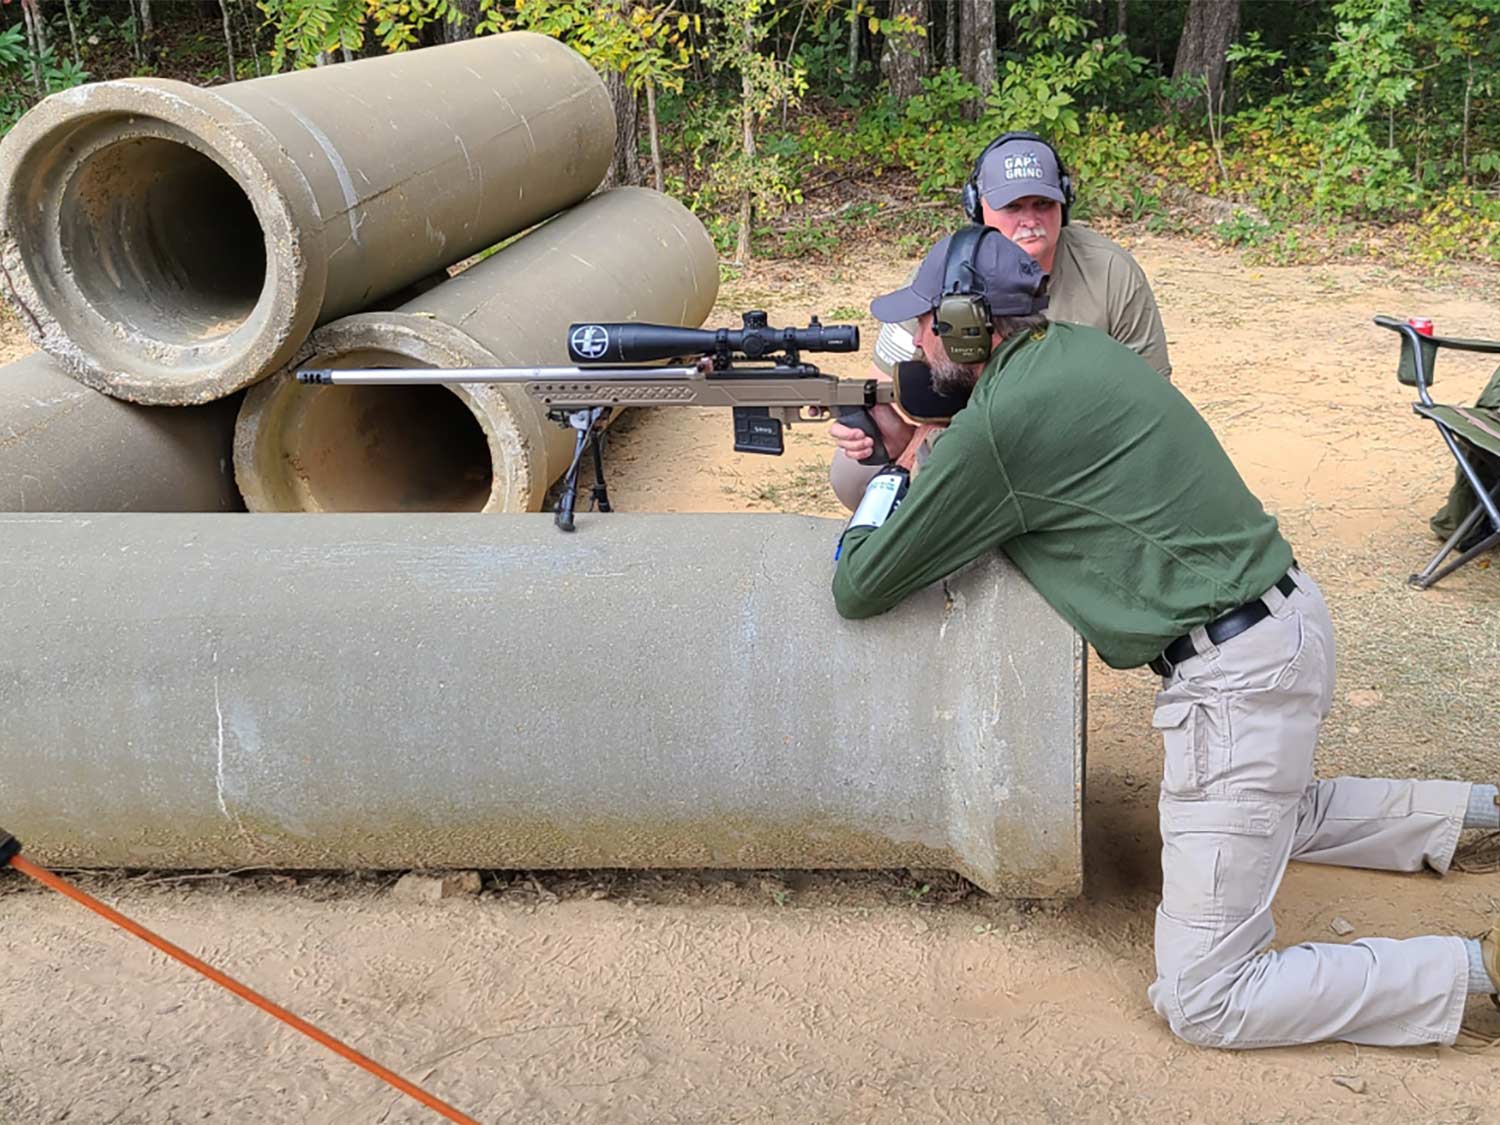 A man leans over a pipe and aims a rifle while glancing through a riflescope.